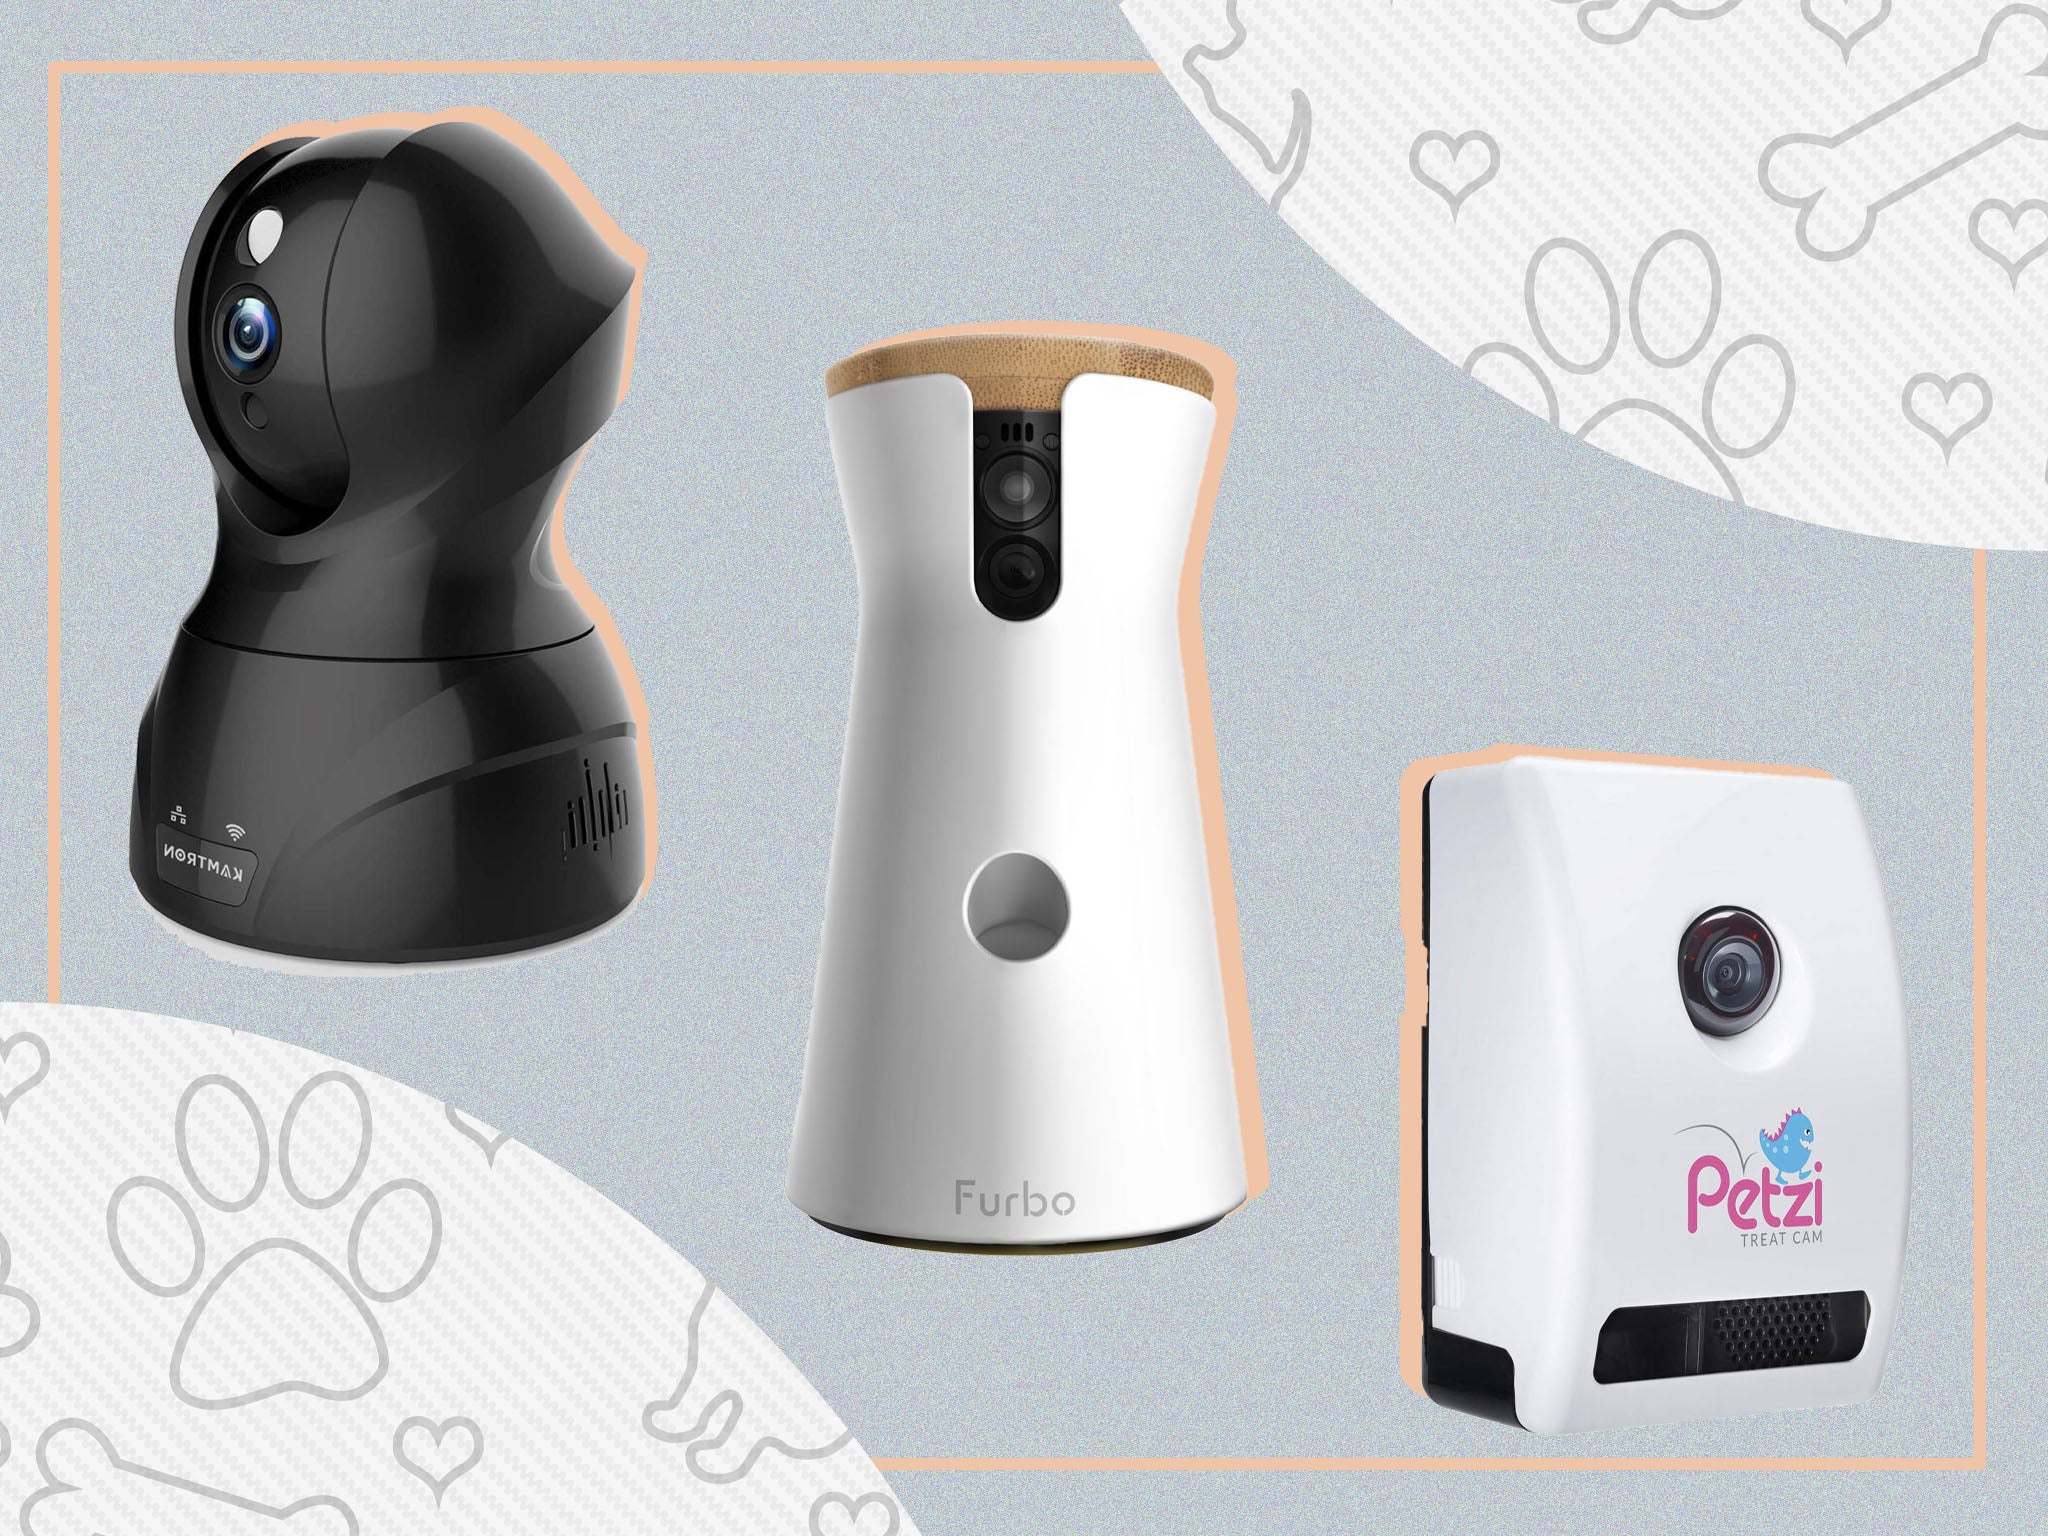 Choose from food dispensers, interactive gadgets and two-way audio systems